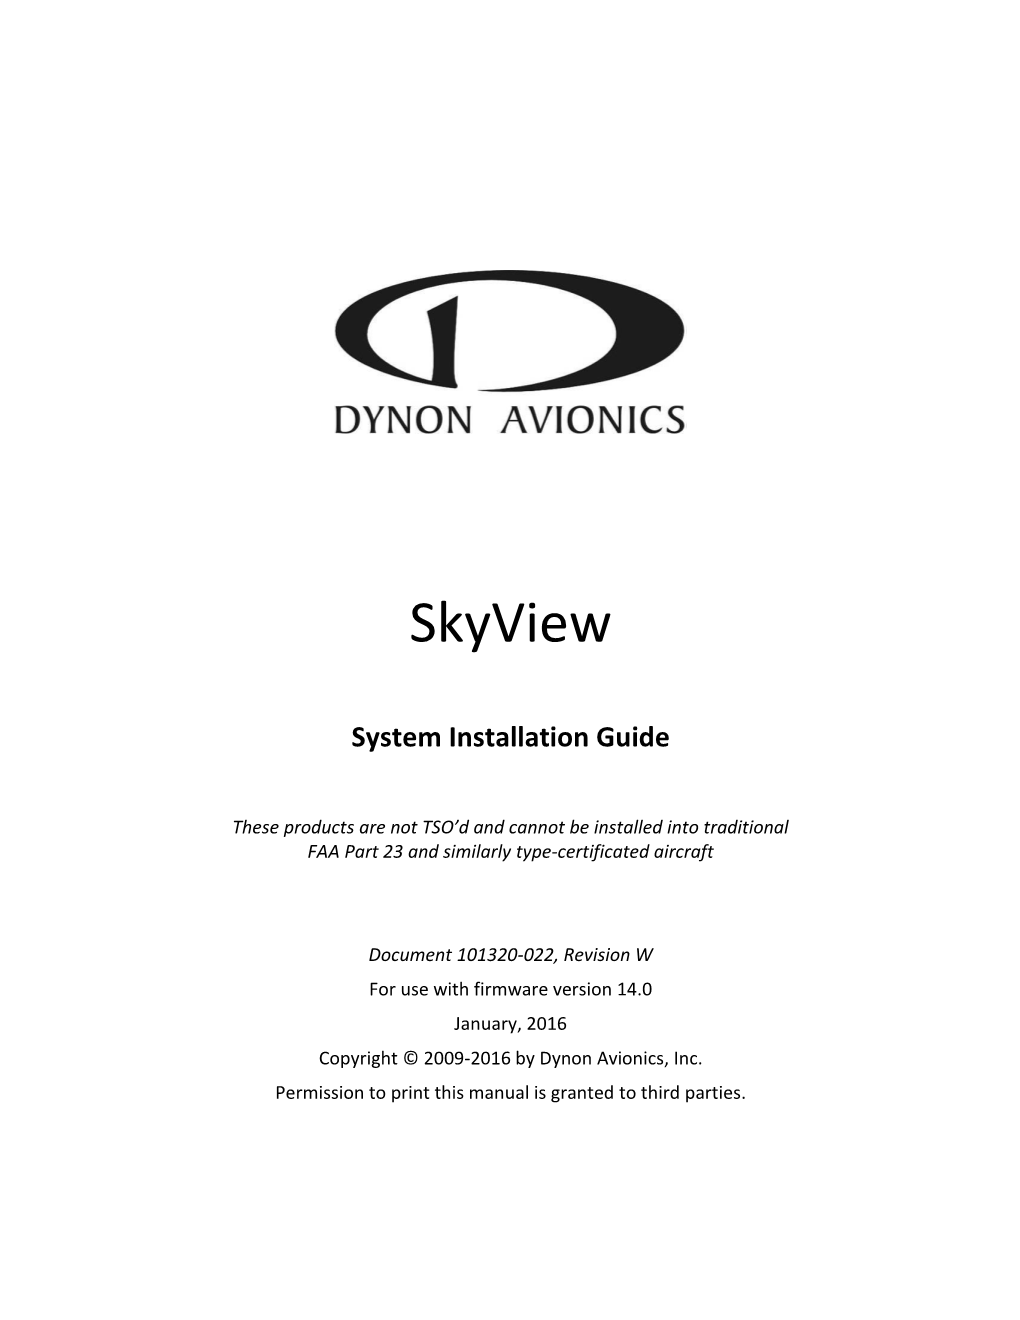 Skyview System Installation Guide Revision History